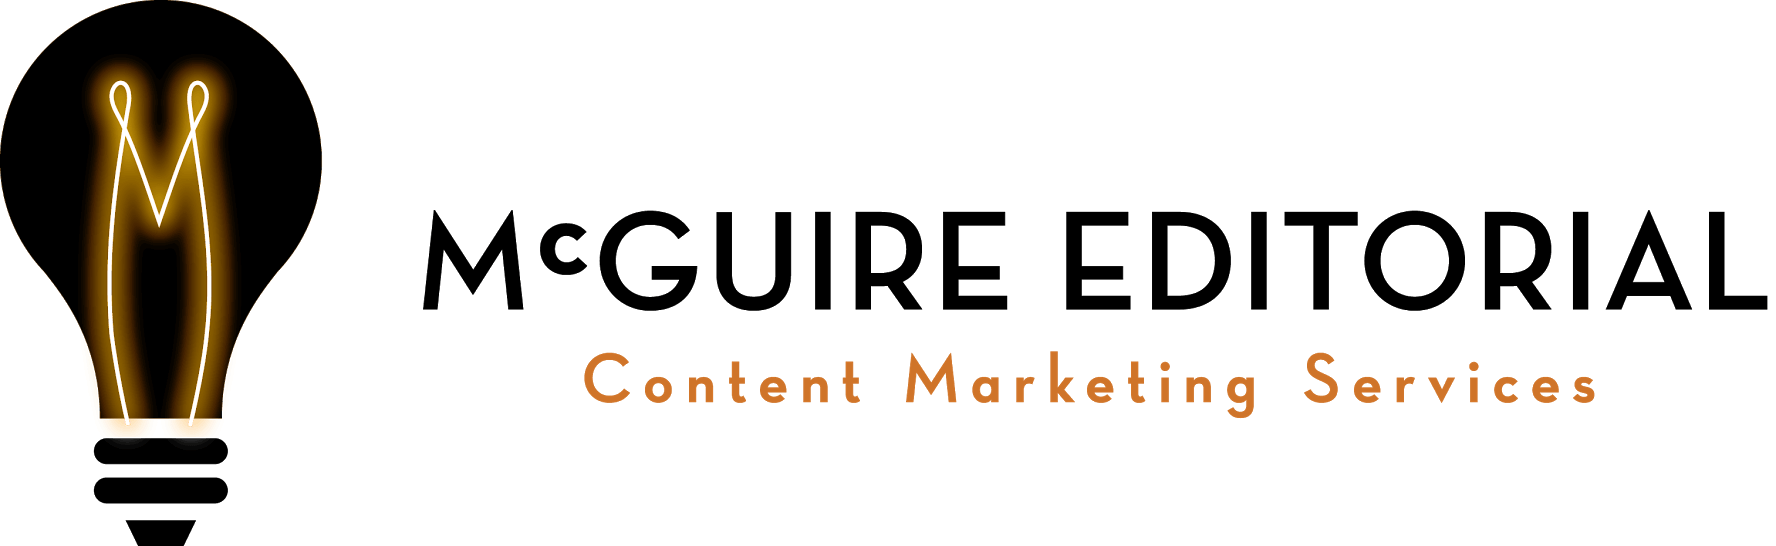 McGuire Editorial: Content Marketing, Planning and Editing